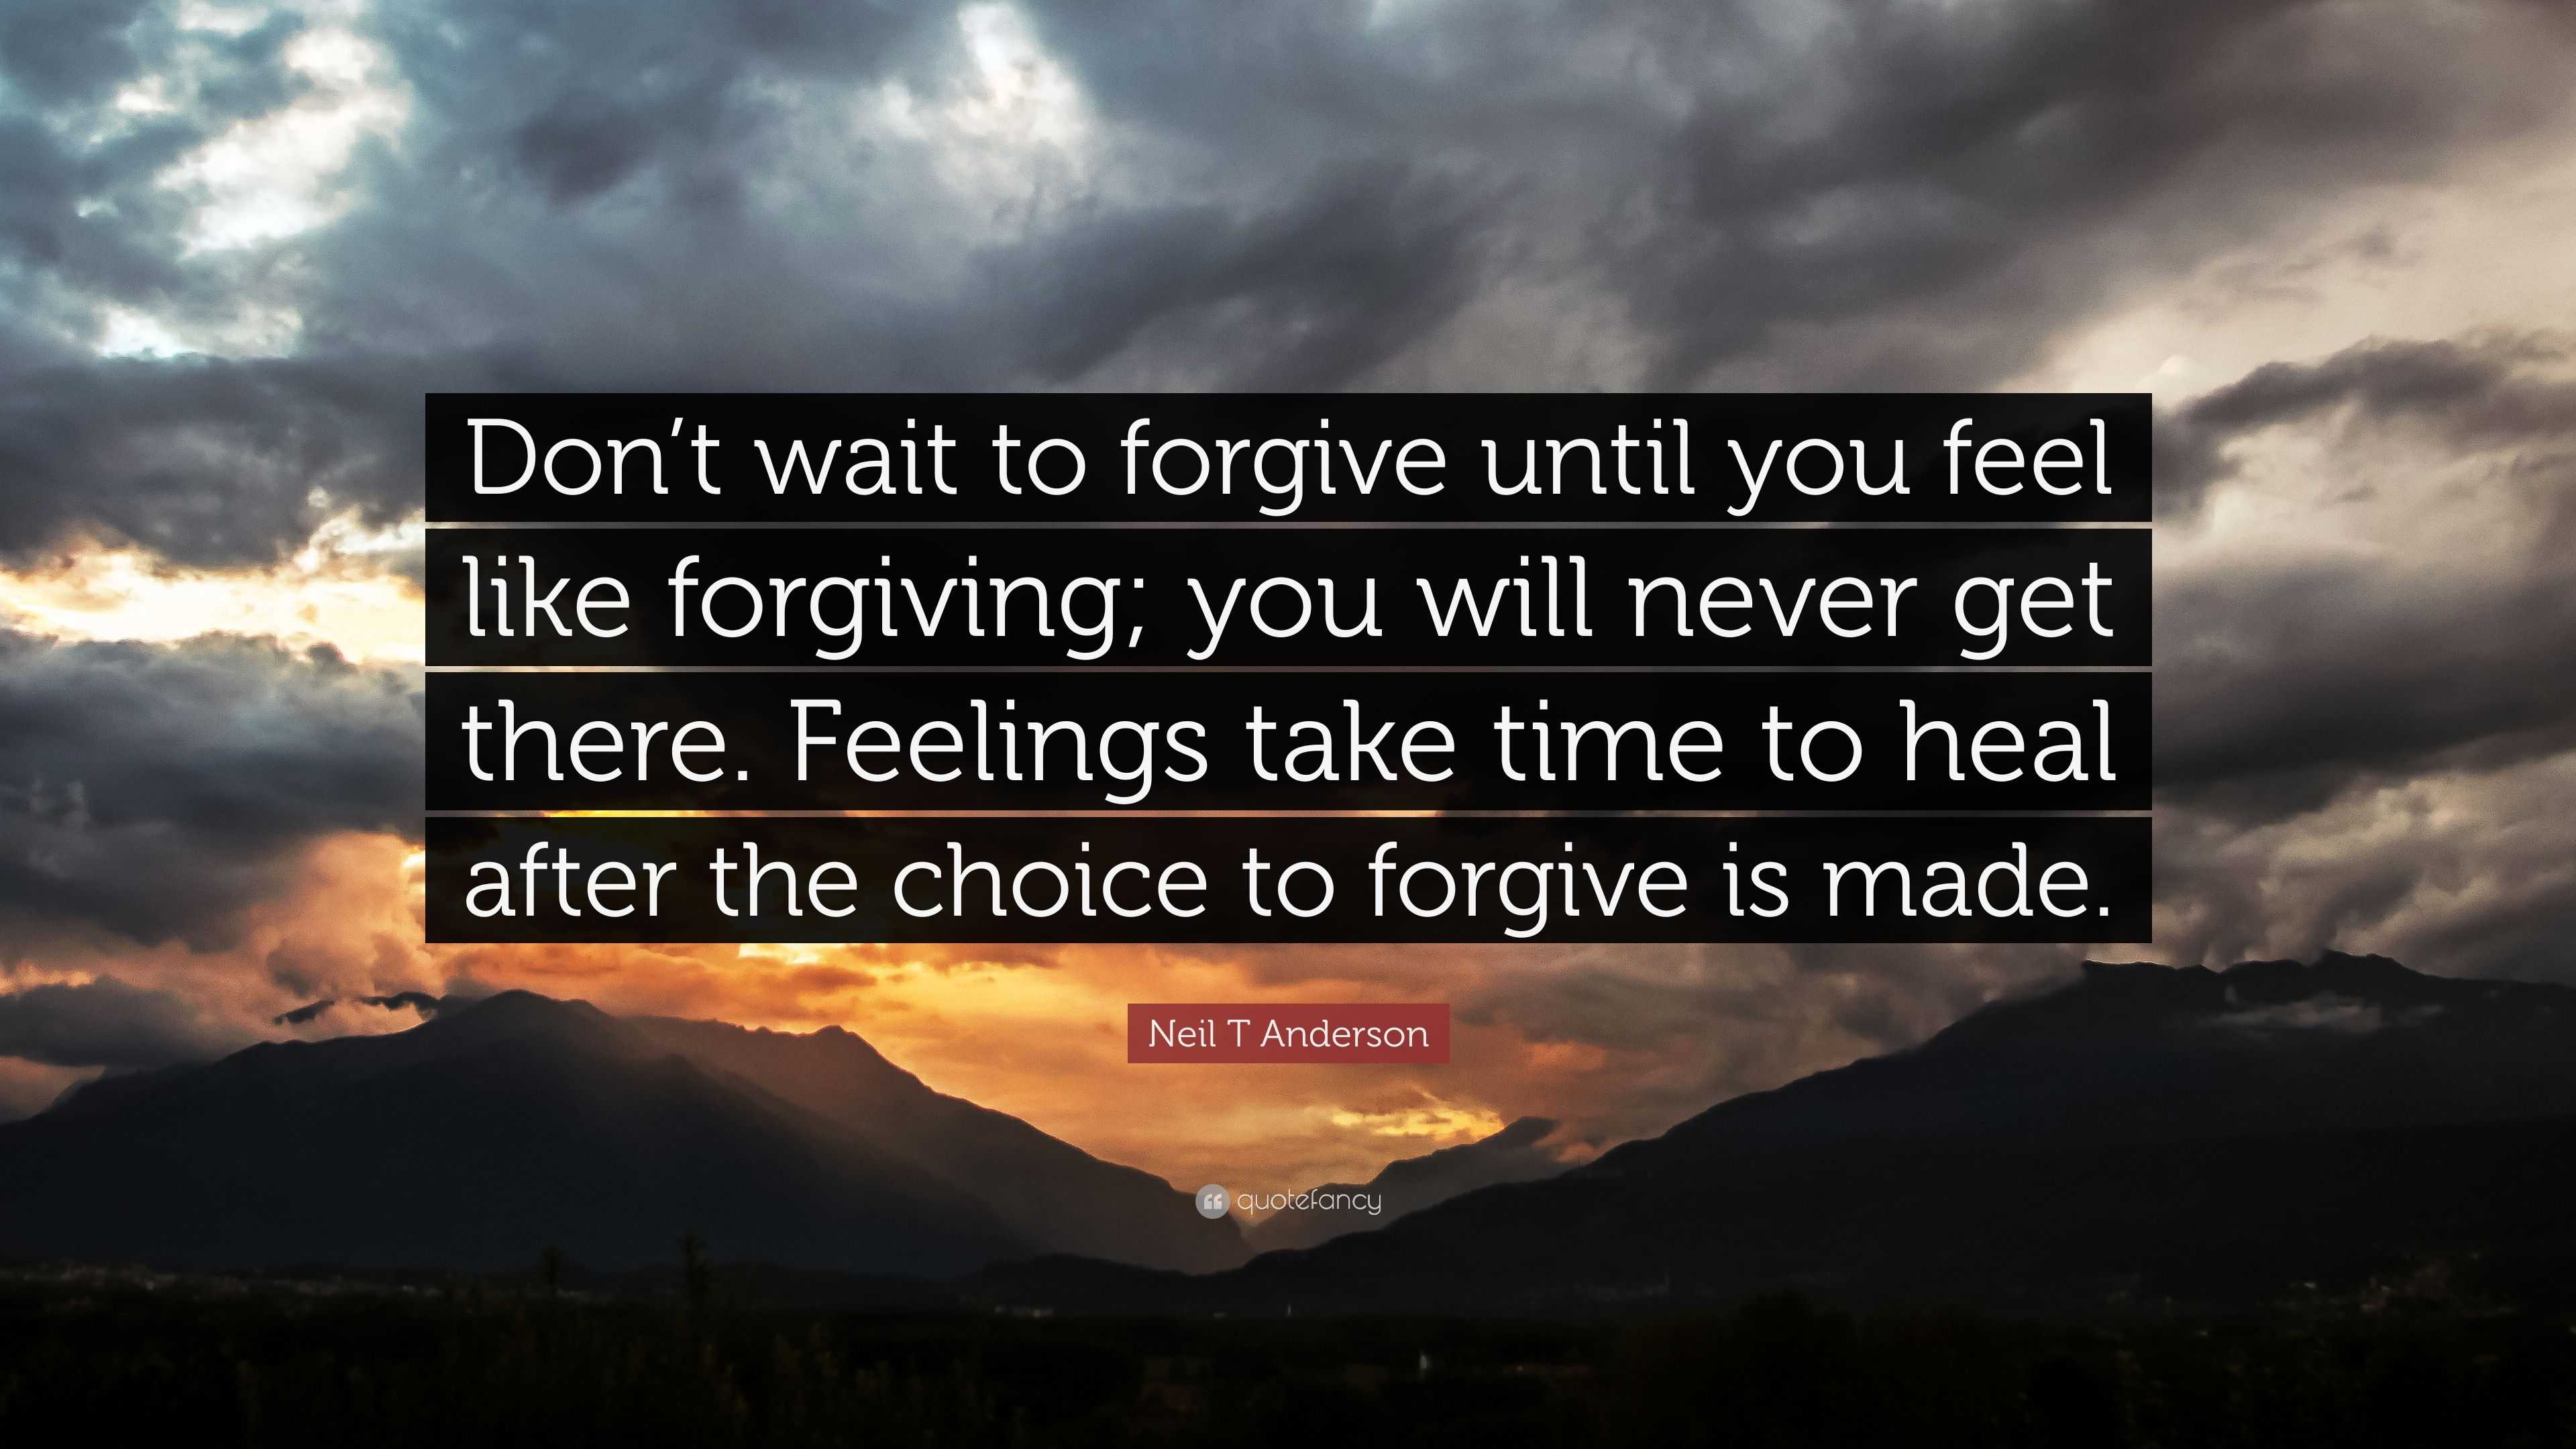 Neil T Anderson Quote: “Don’t wait to forgive until you feel like ...